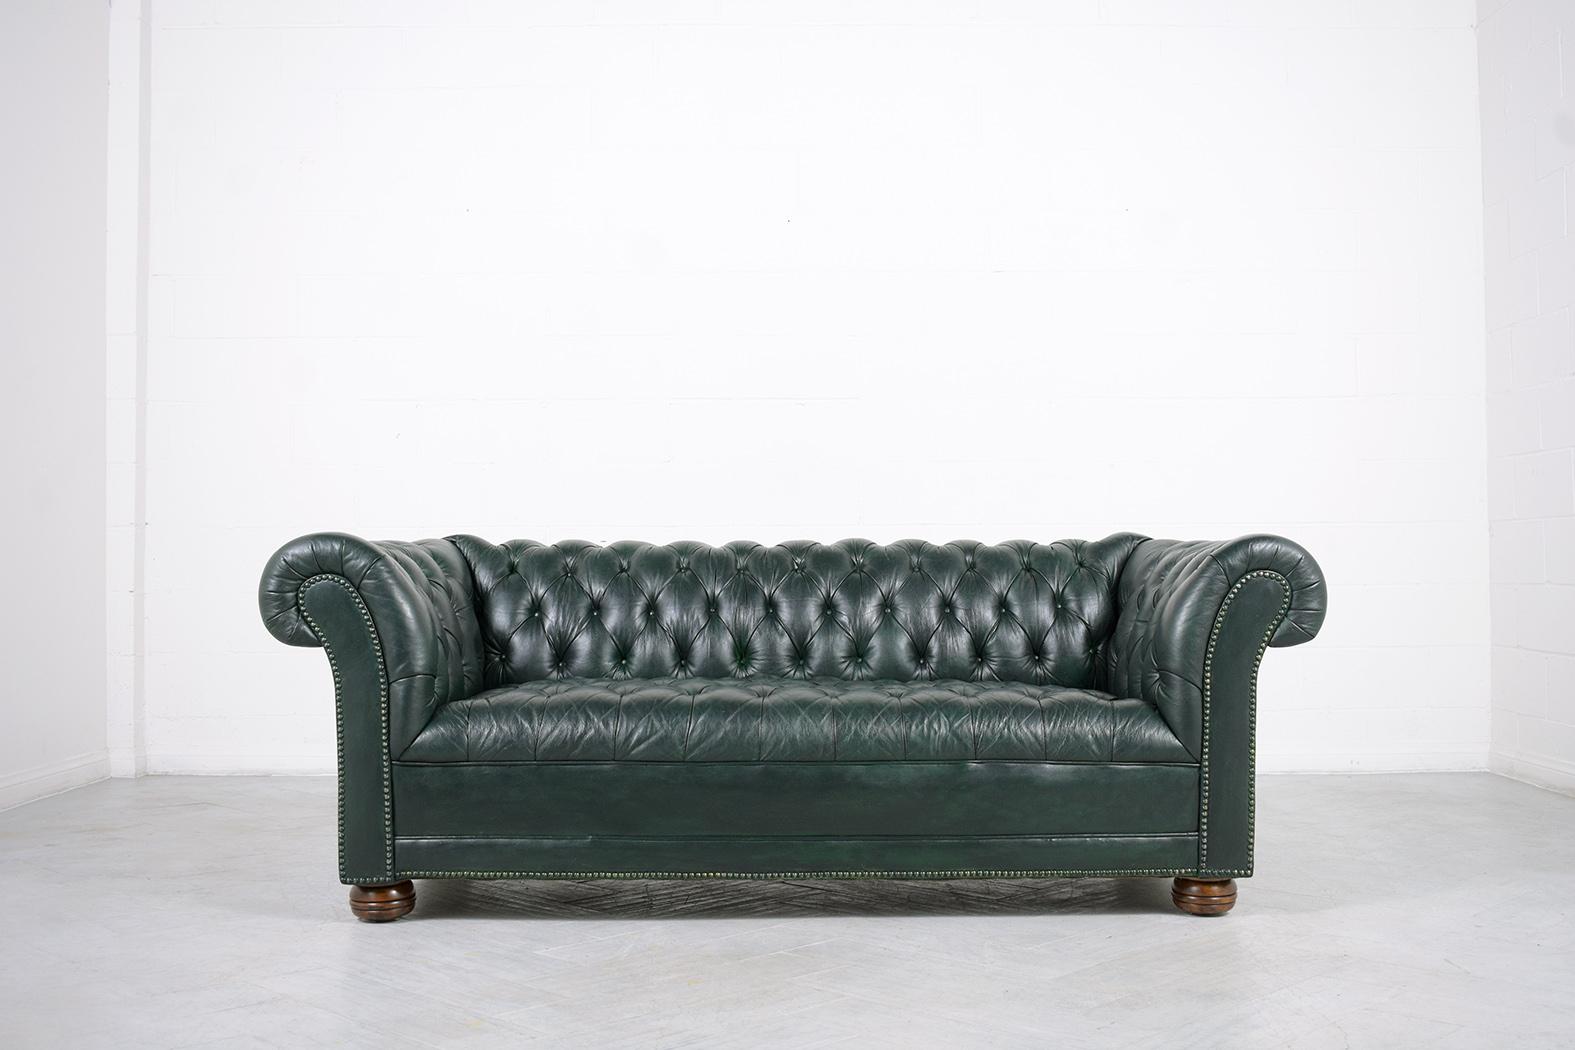 An extraordinary vintage green leather tufted chesterfield sofa in great condition is crafted out of solid wood and leather combination completely restored by our professional craftsmen team and has been newly dyed in a custom dark green color. The